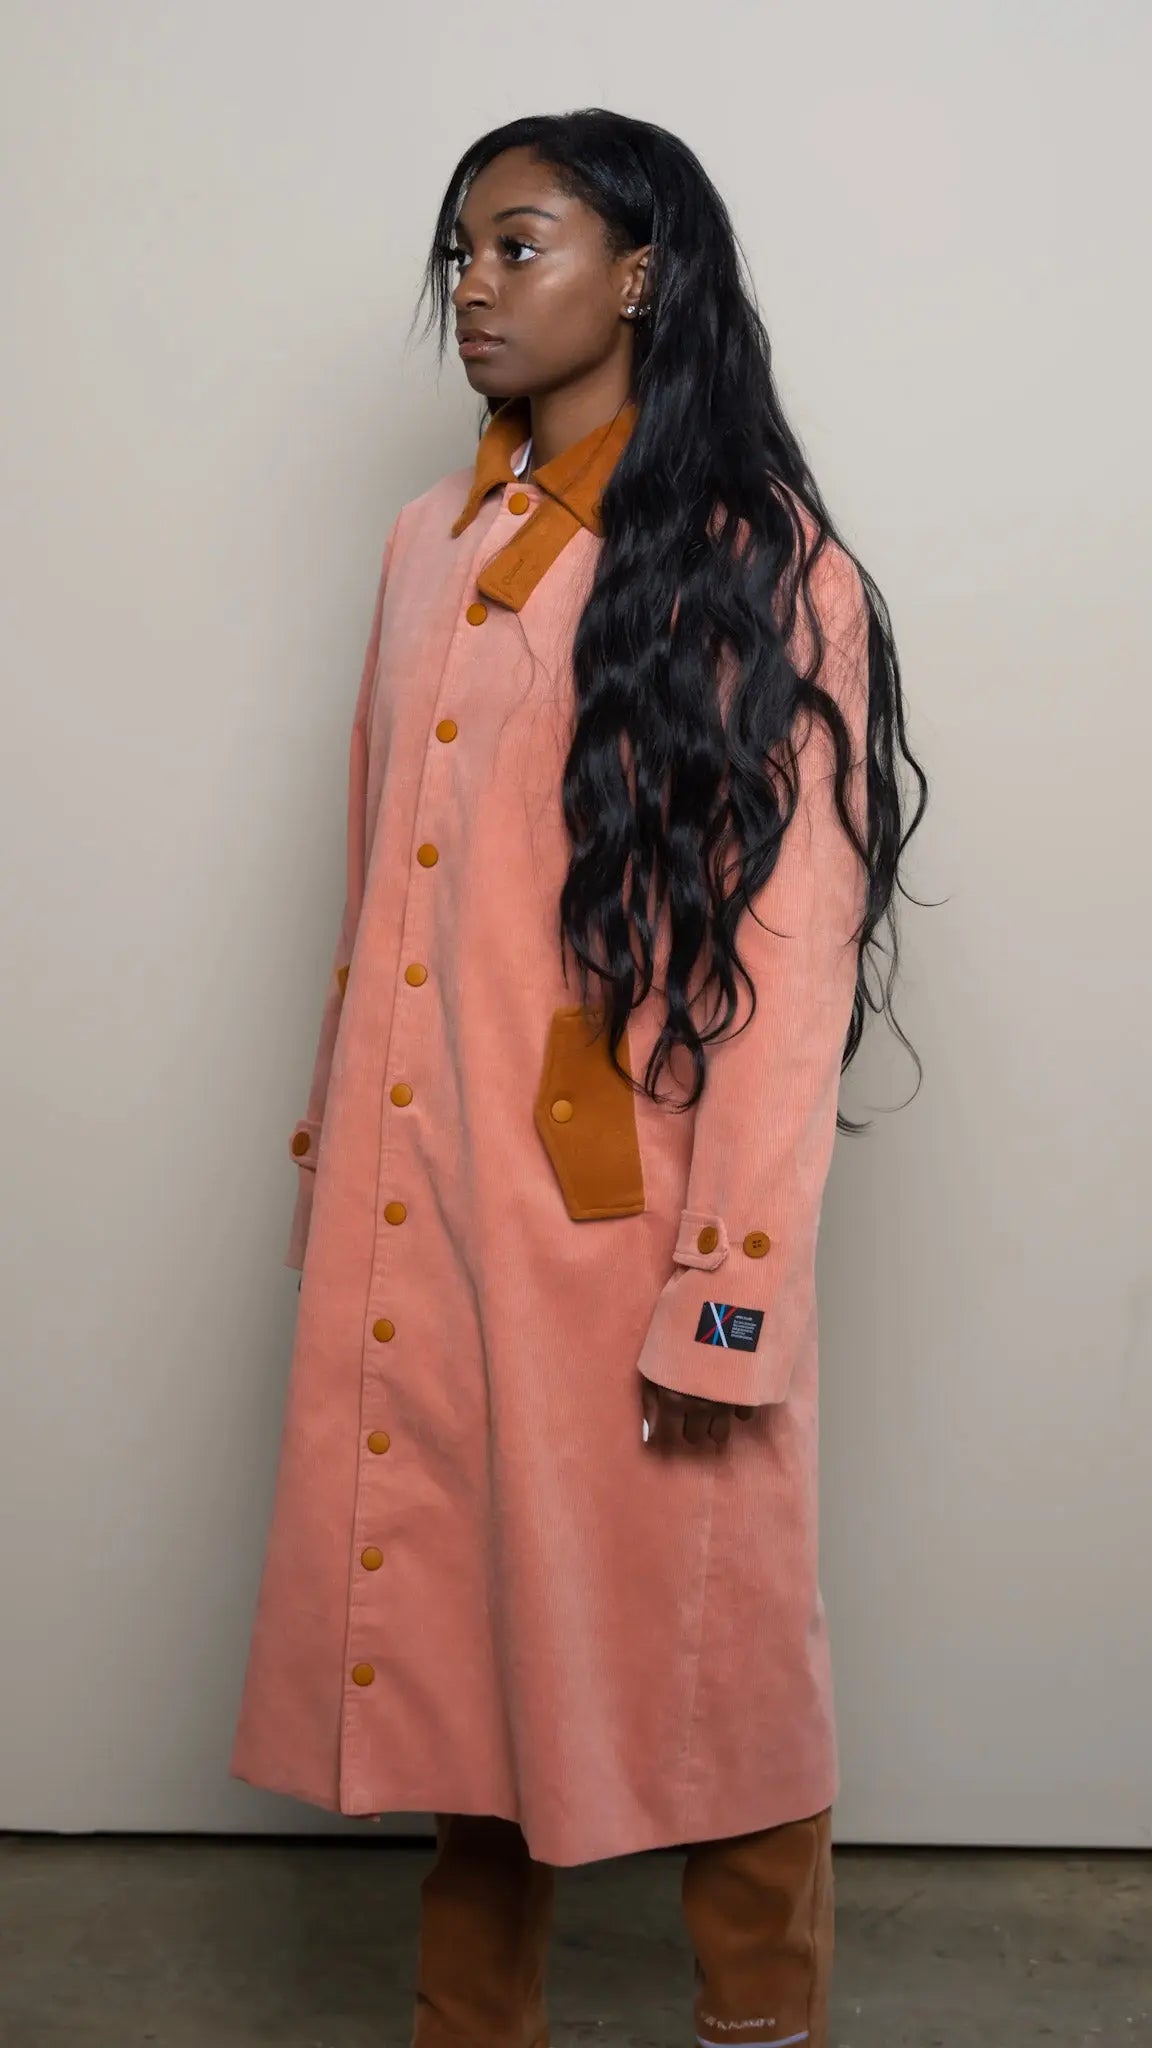 Photo of model in the Arius Juan Salmon Pink Earthly Trench Coat posing for product picture.